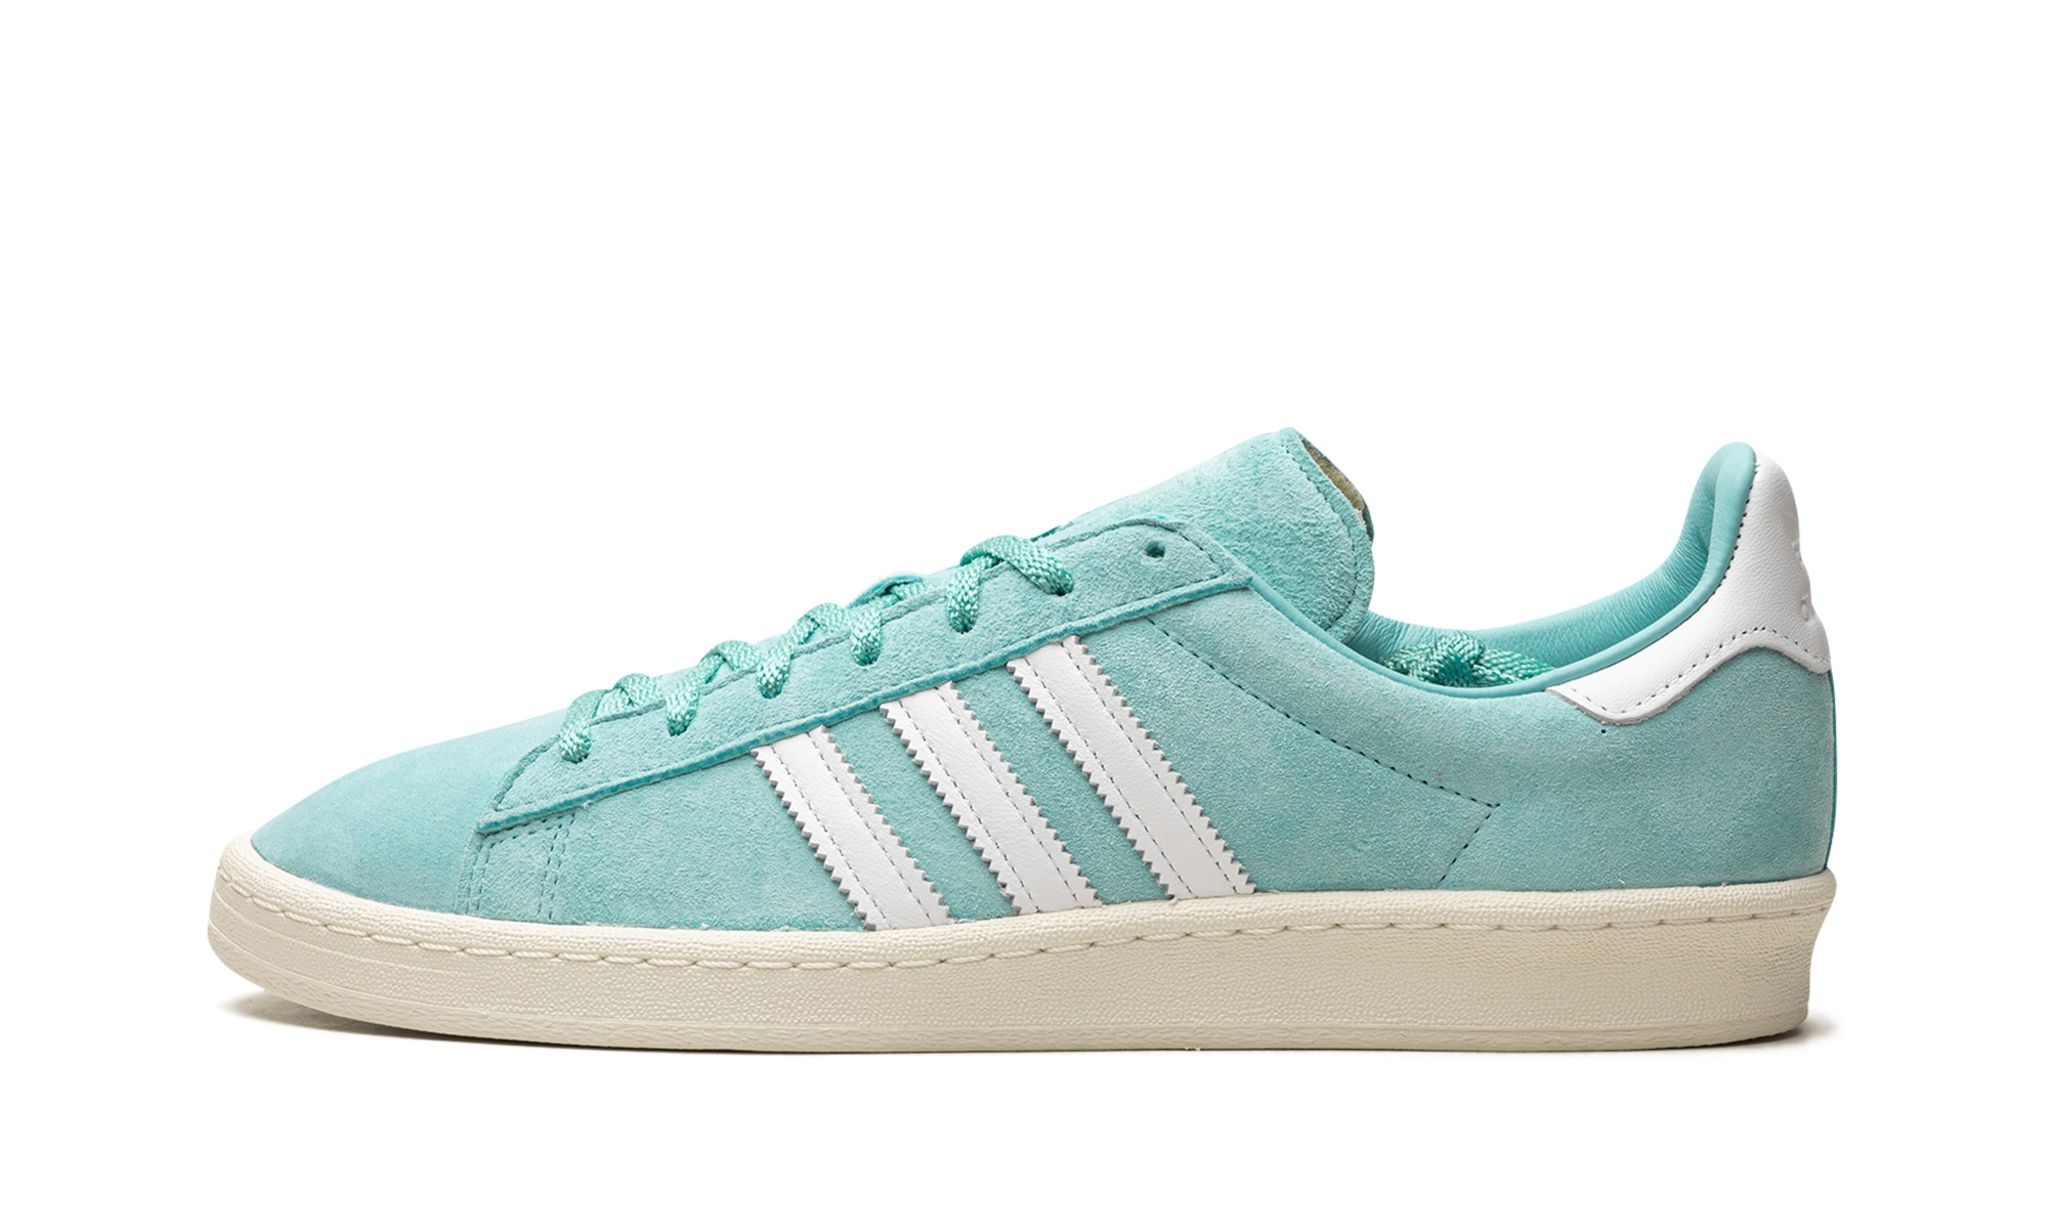 Campus 80s "Easy Mint" - 1